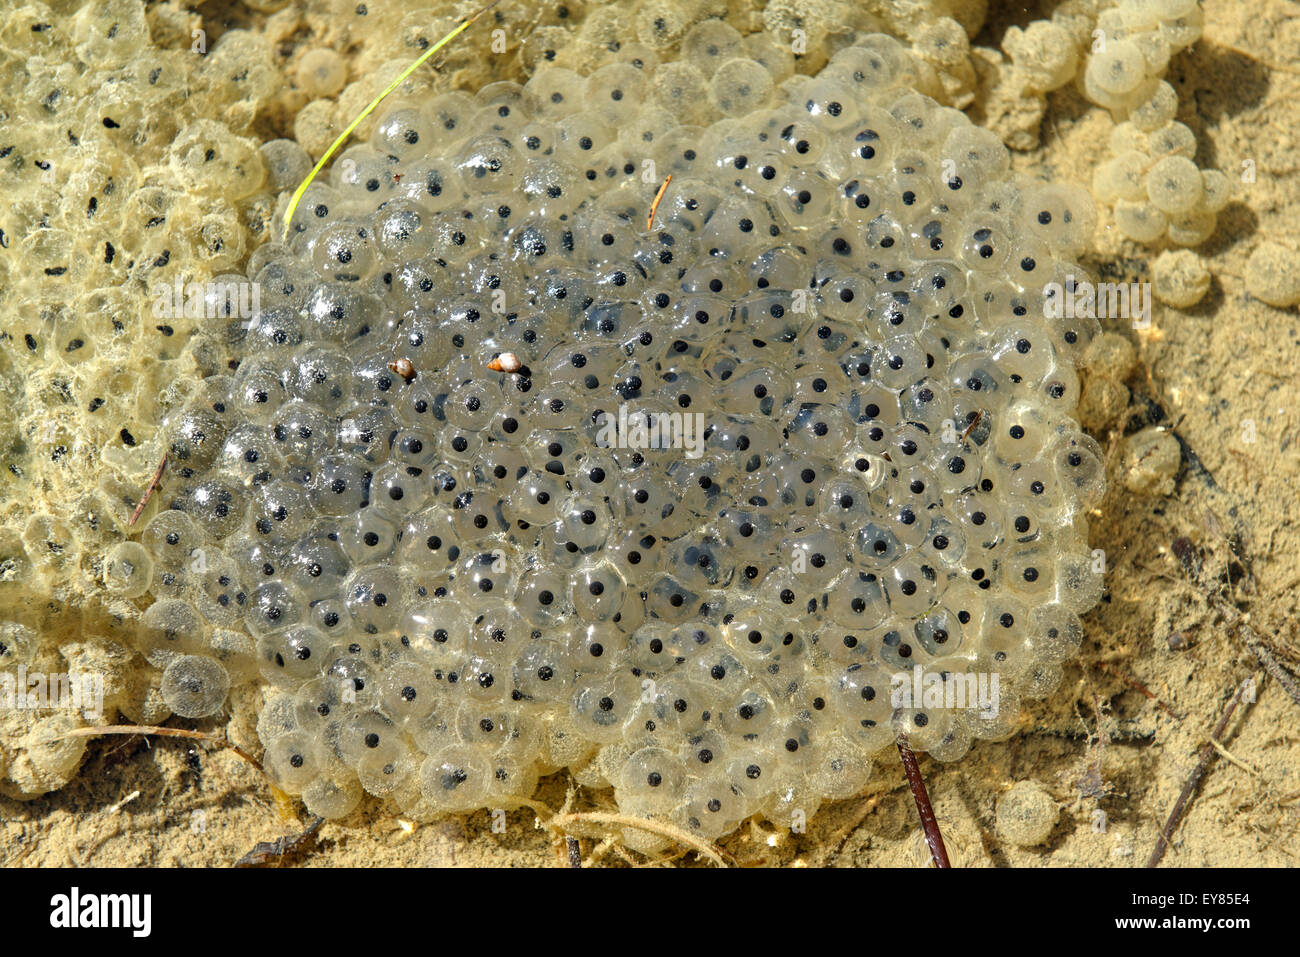 Frog spawn in the water, frog eggs, Upper Bavaria, Bavaria, Germany Stock Photo